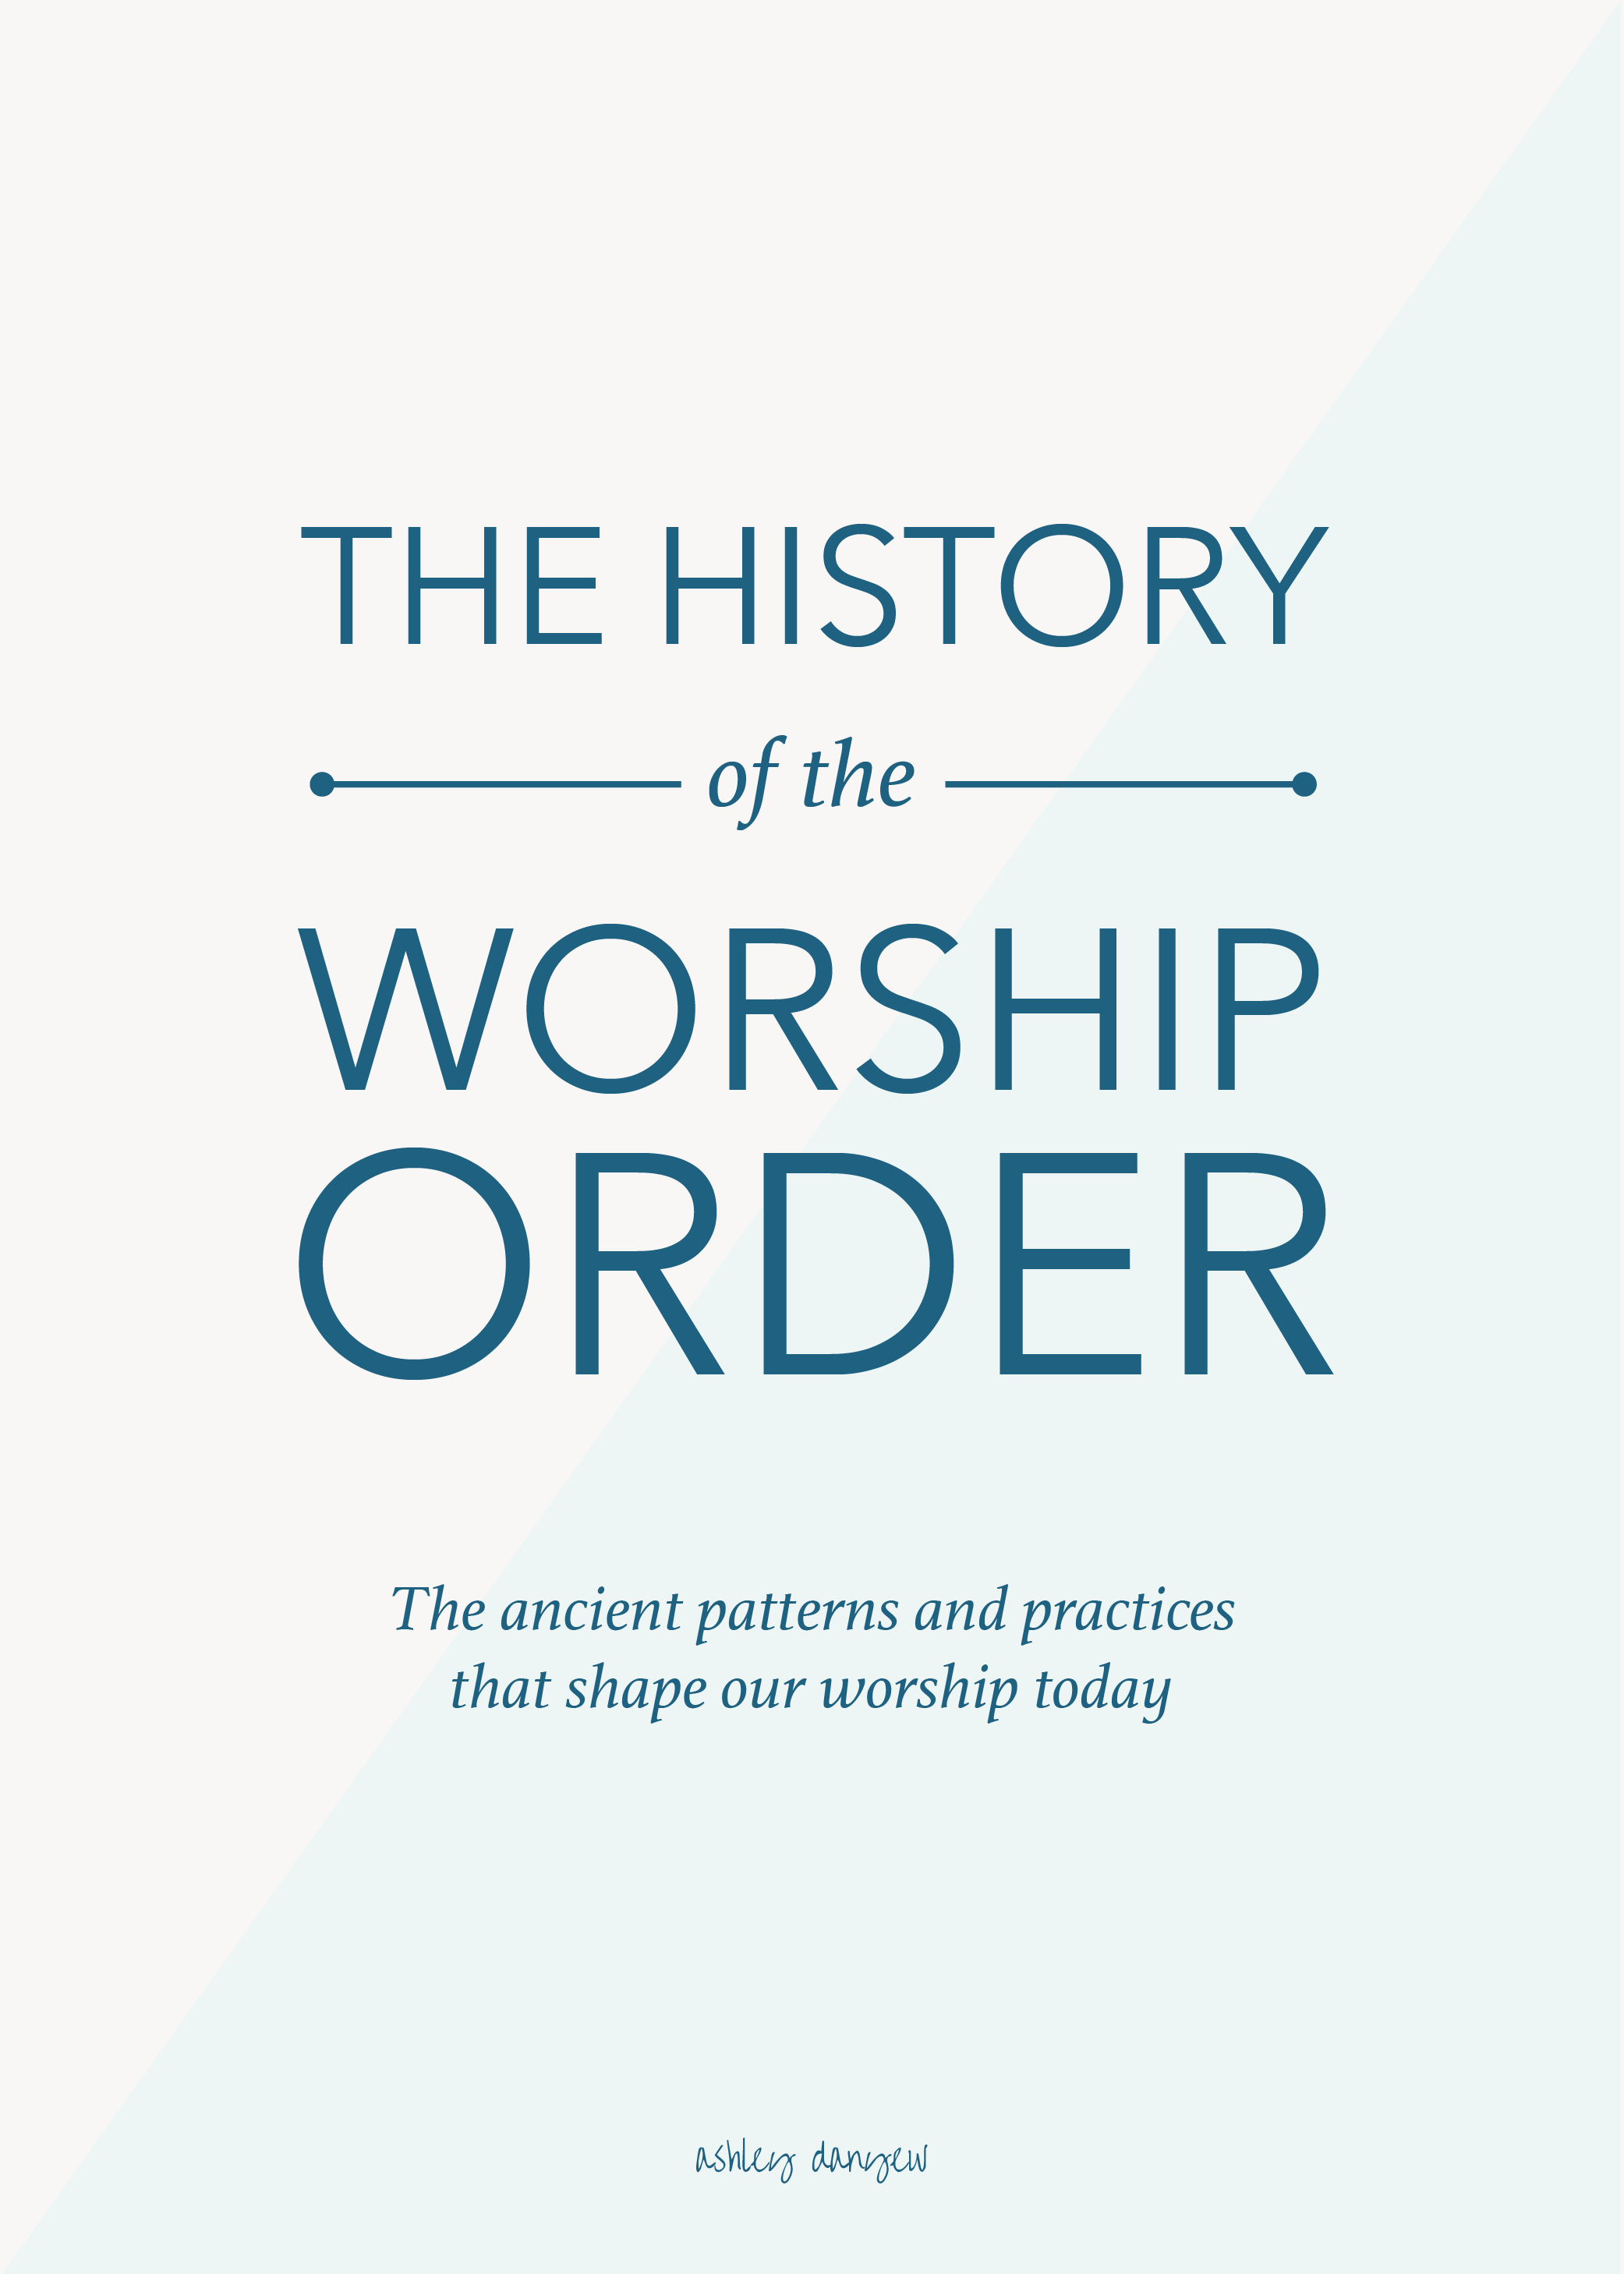 Copy of The History of the Worship Order